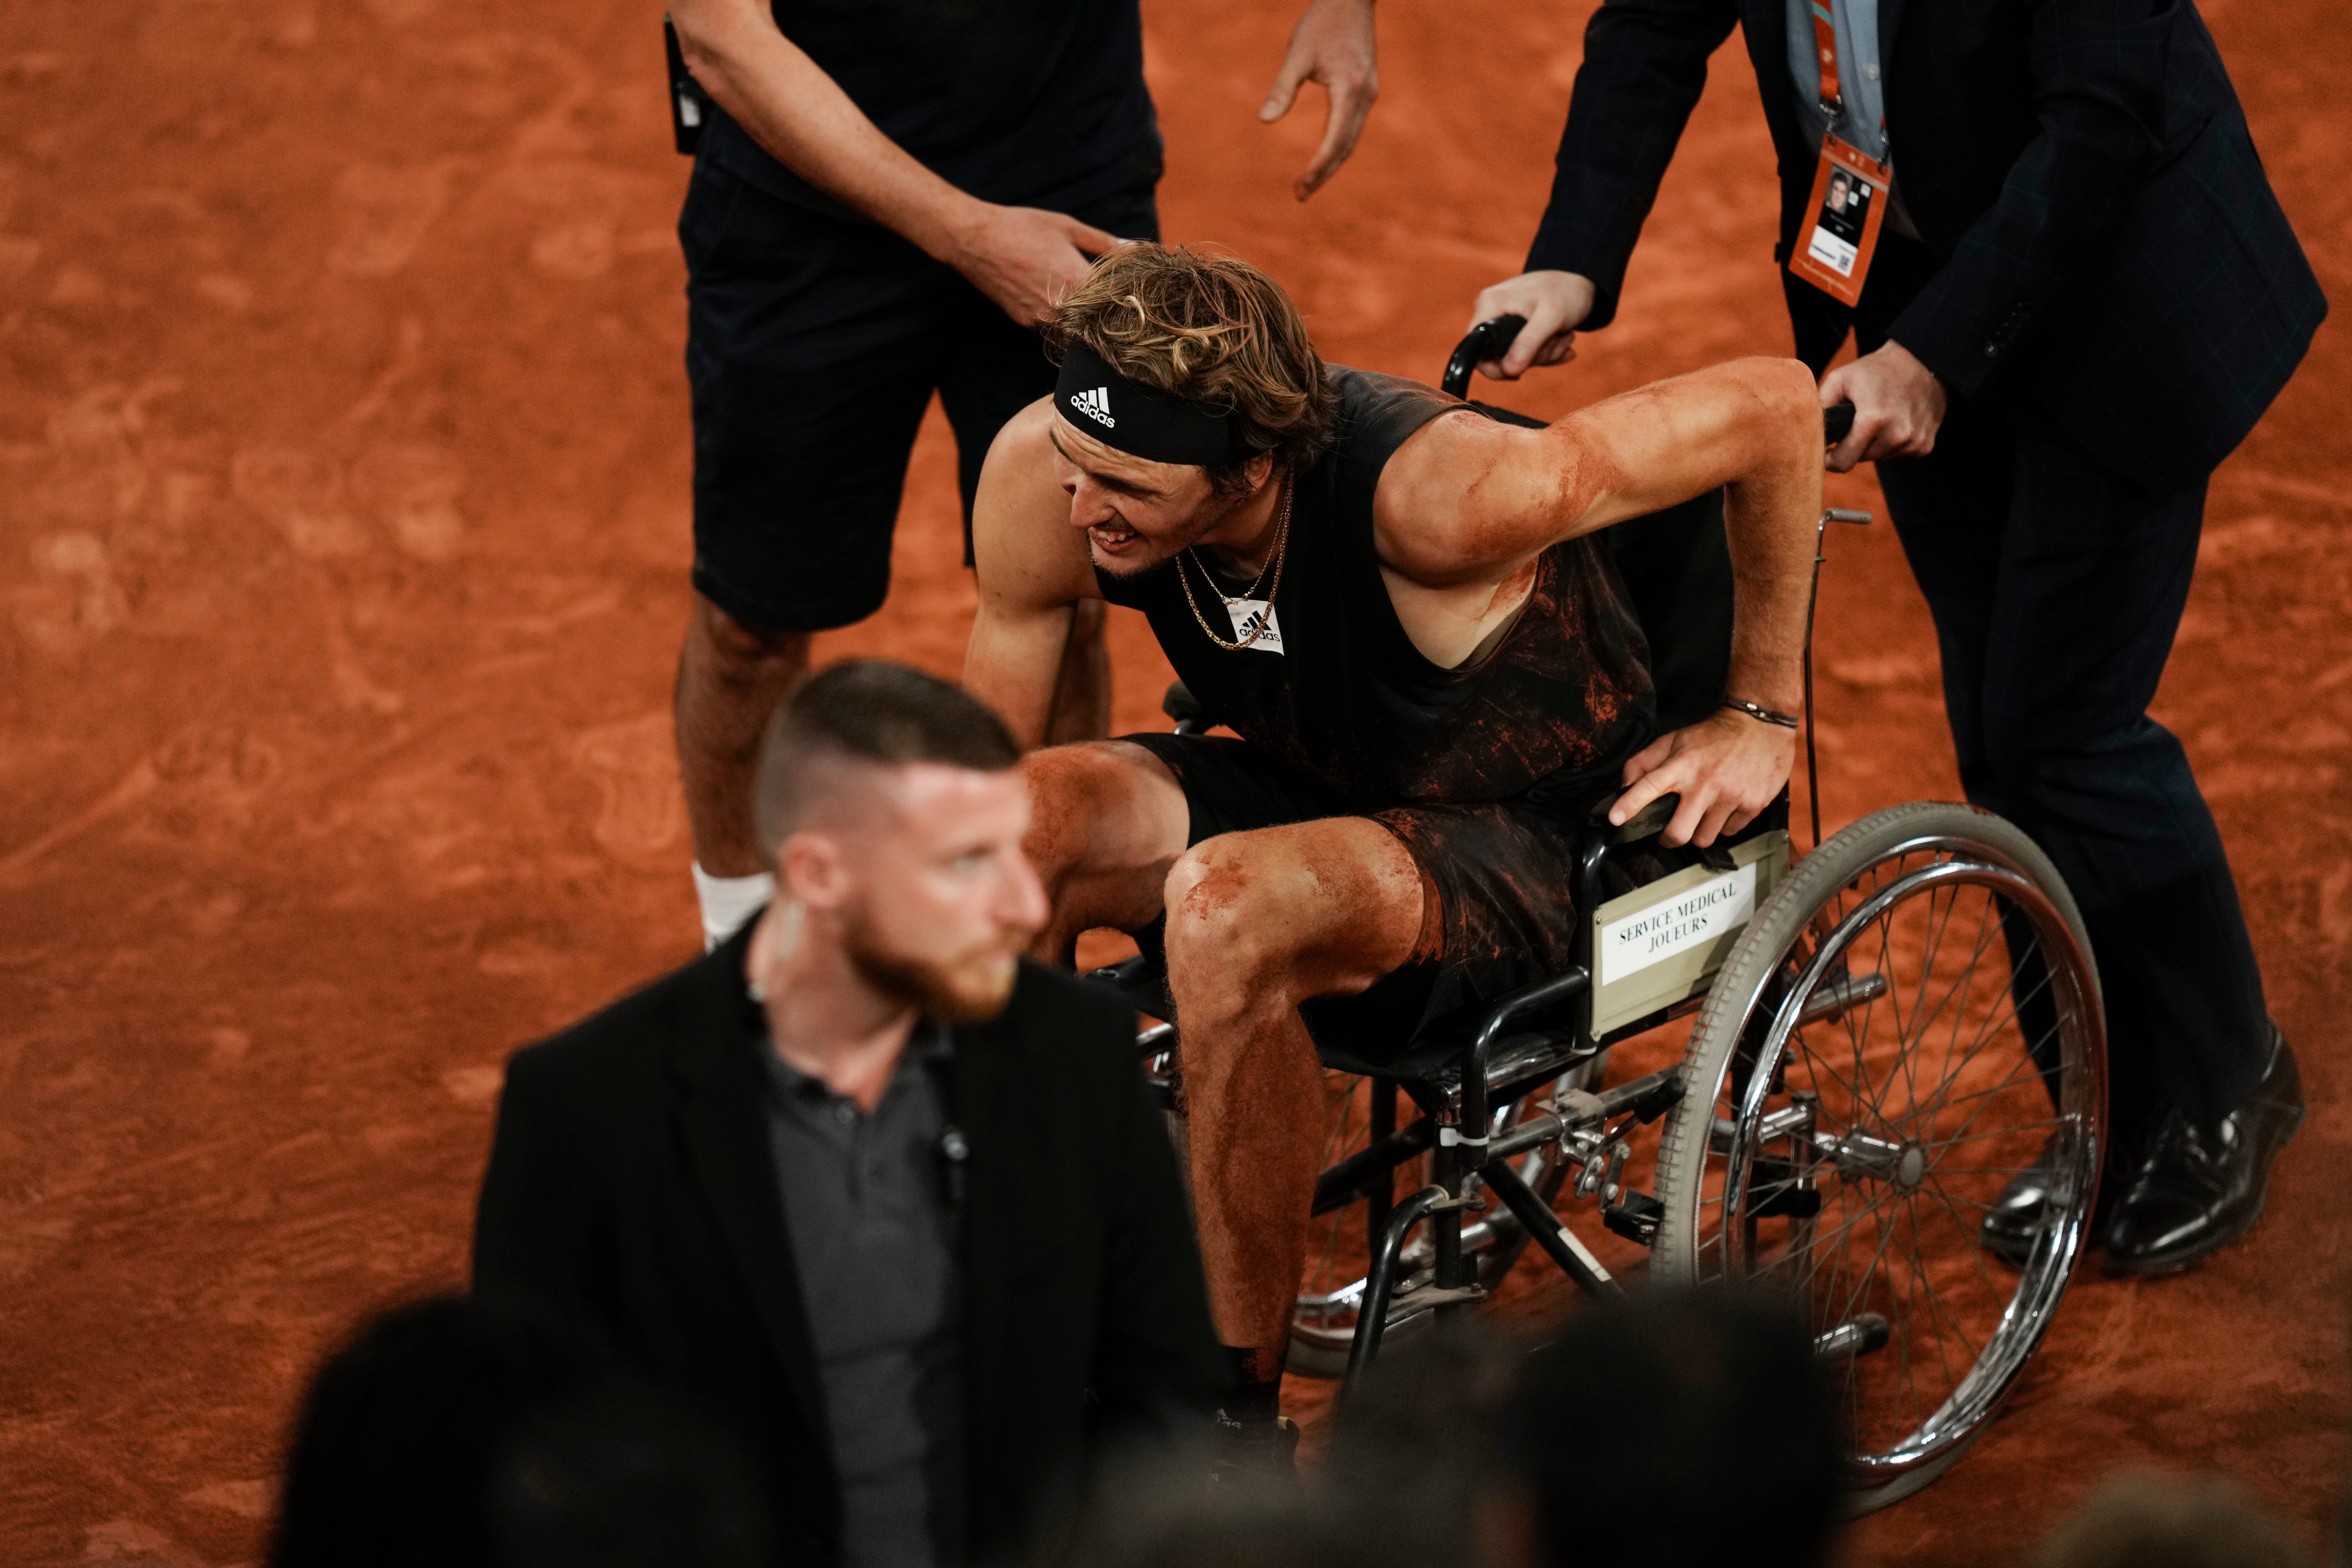 Alexander Zverev has said the injury he suffered in the French Open semi-final against Rafael Nadal is ‘very serious’ (Thibault Camus/AP)